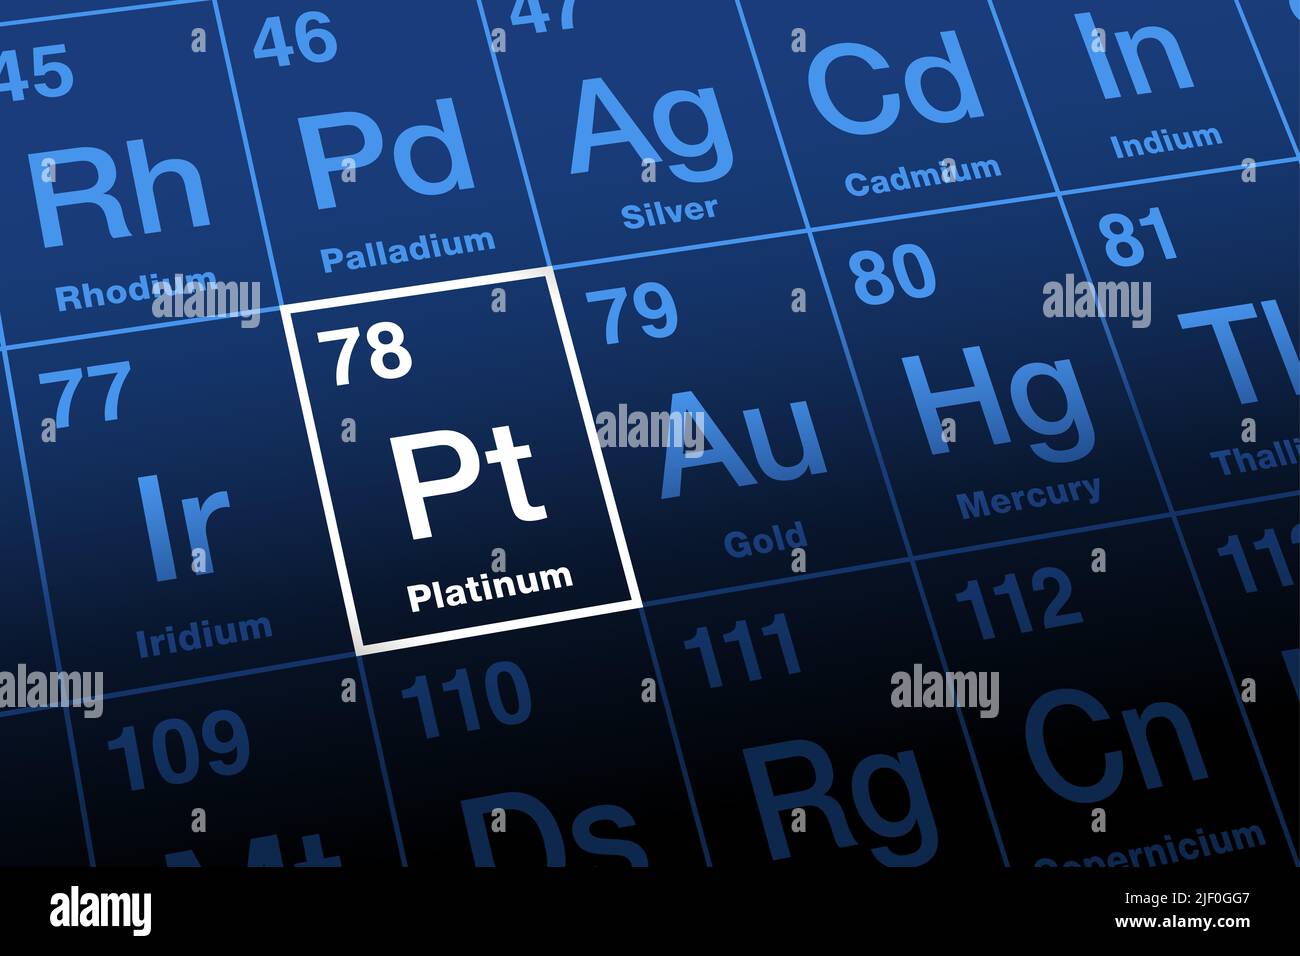 Platinum on periodic table of the elements. Noble and heavy metal with chemical symbol Pt (Spanish plata for Silver), with atomic number 78. Stock Photo